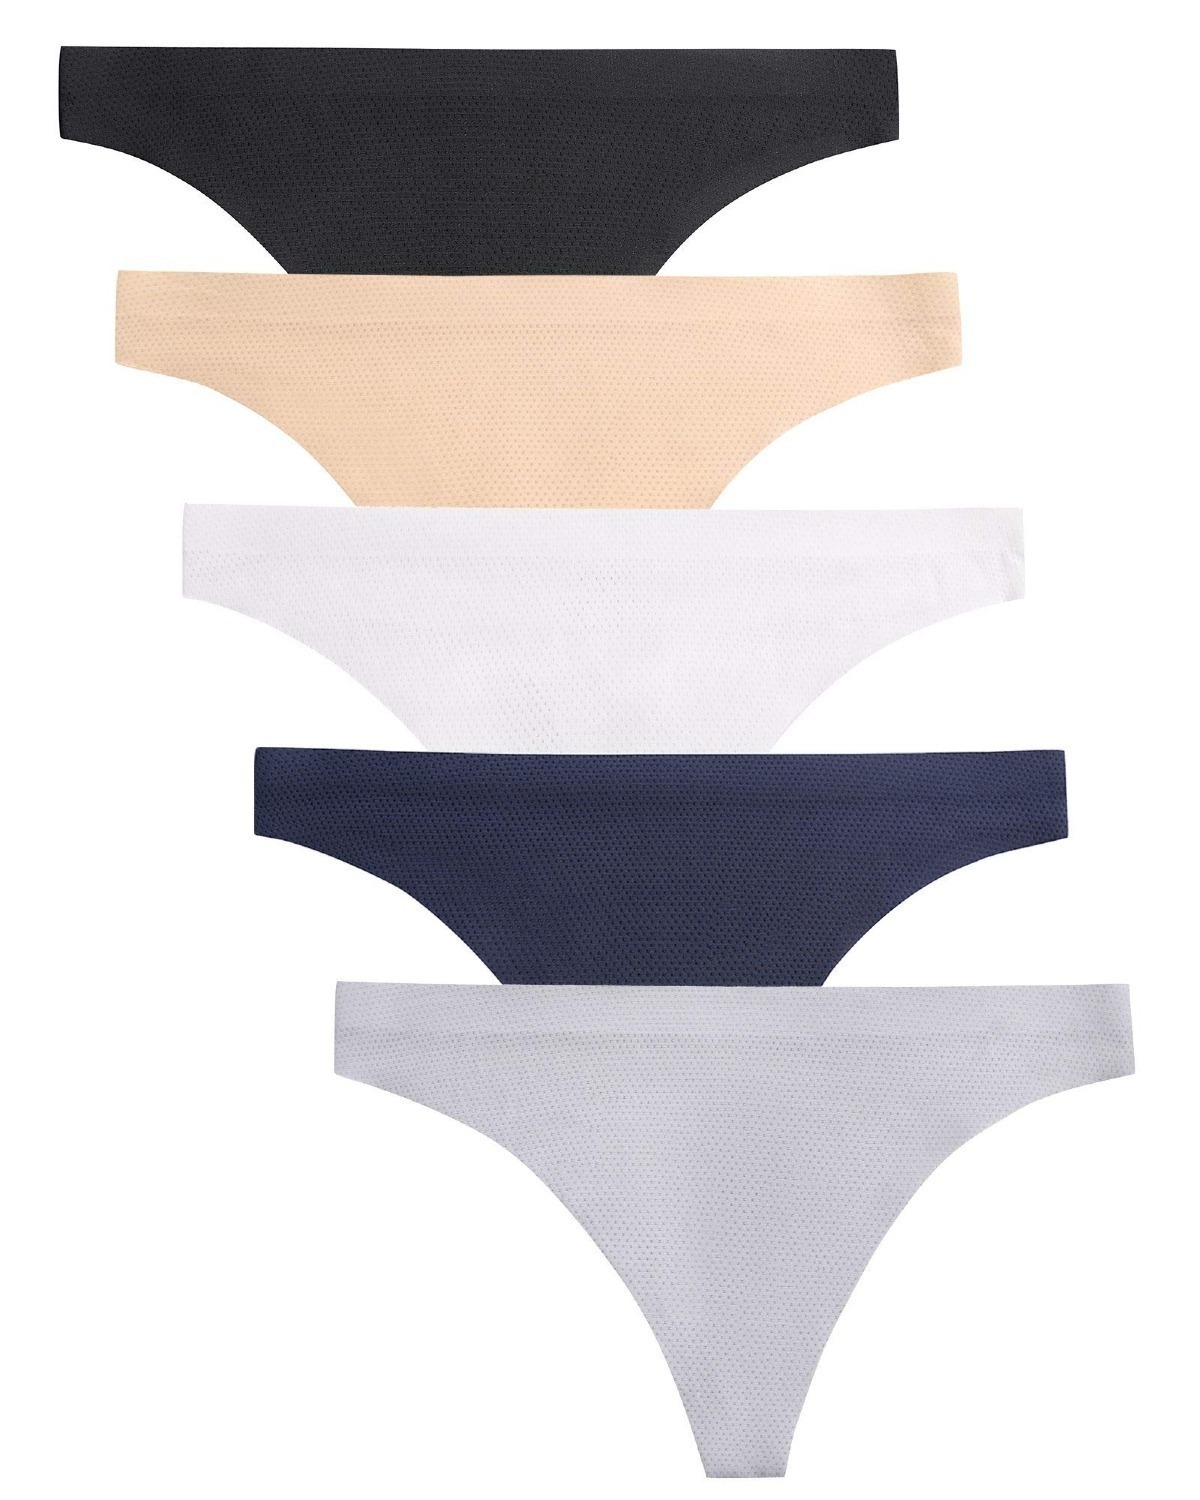 Voenxe 5 Pack Seamless Women Thong Underwear $7 + Free Shipping w/Prime or $35